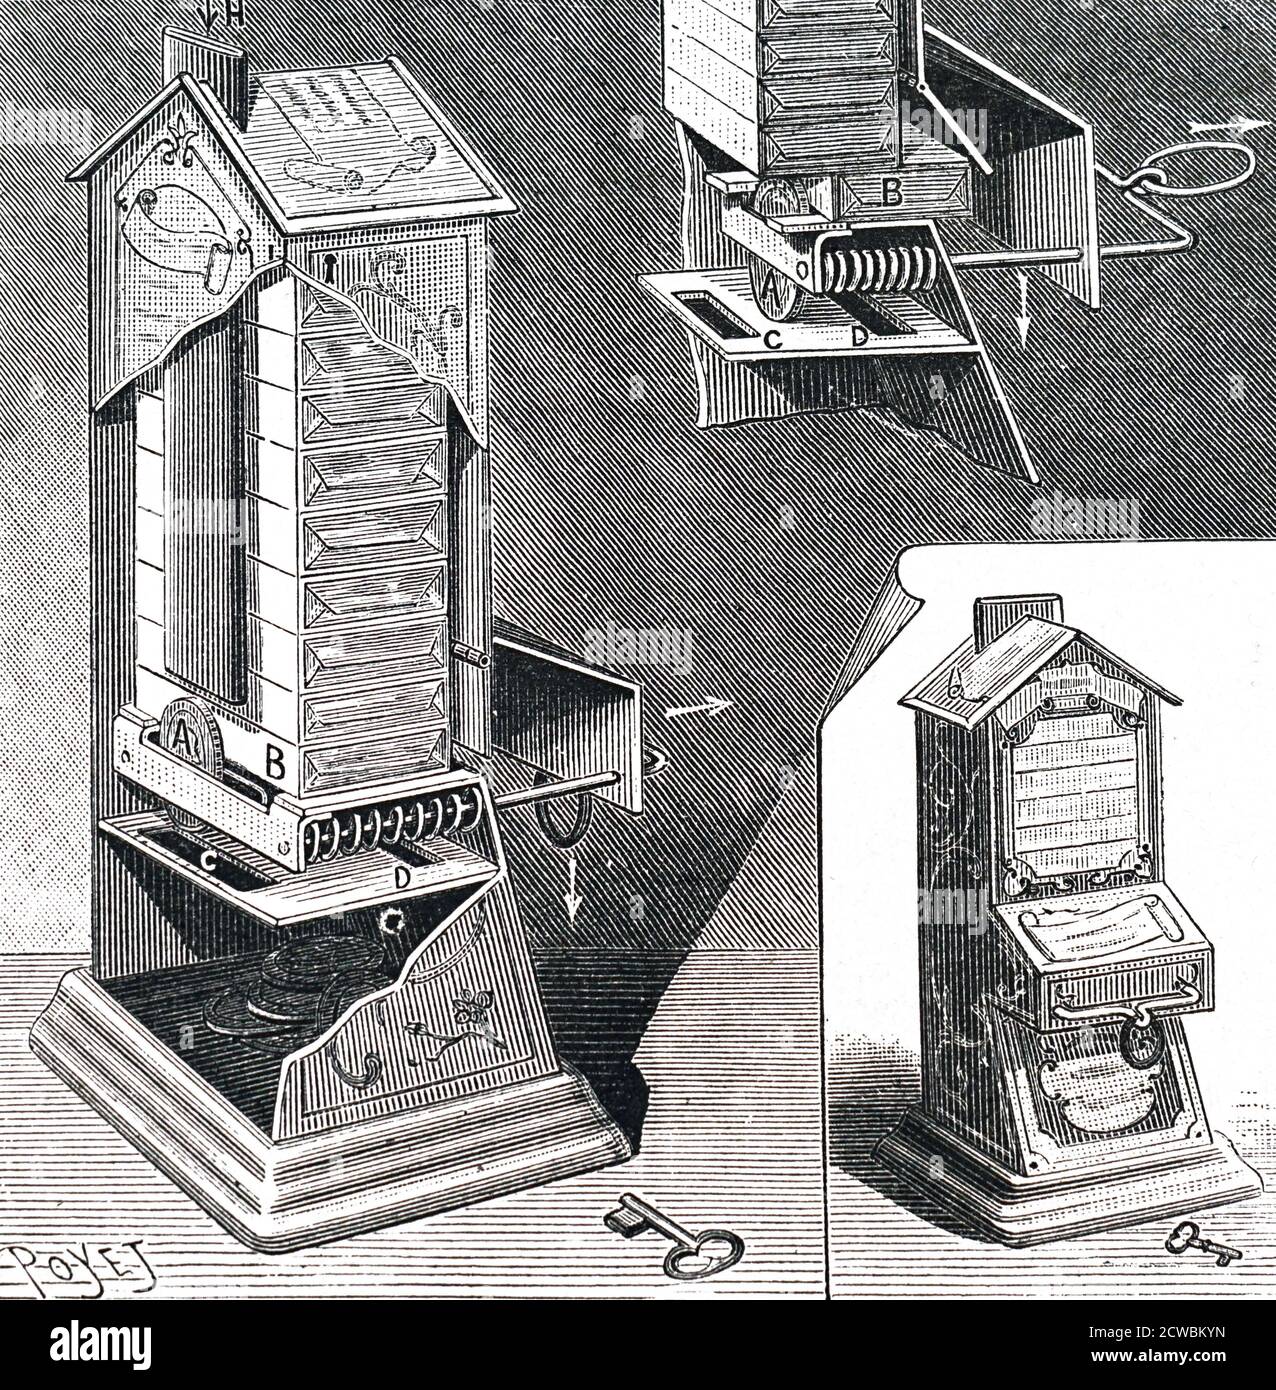 Engraving depicting a coin-in-the-slot sweet dispenser. Stock Photo